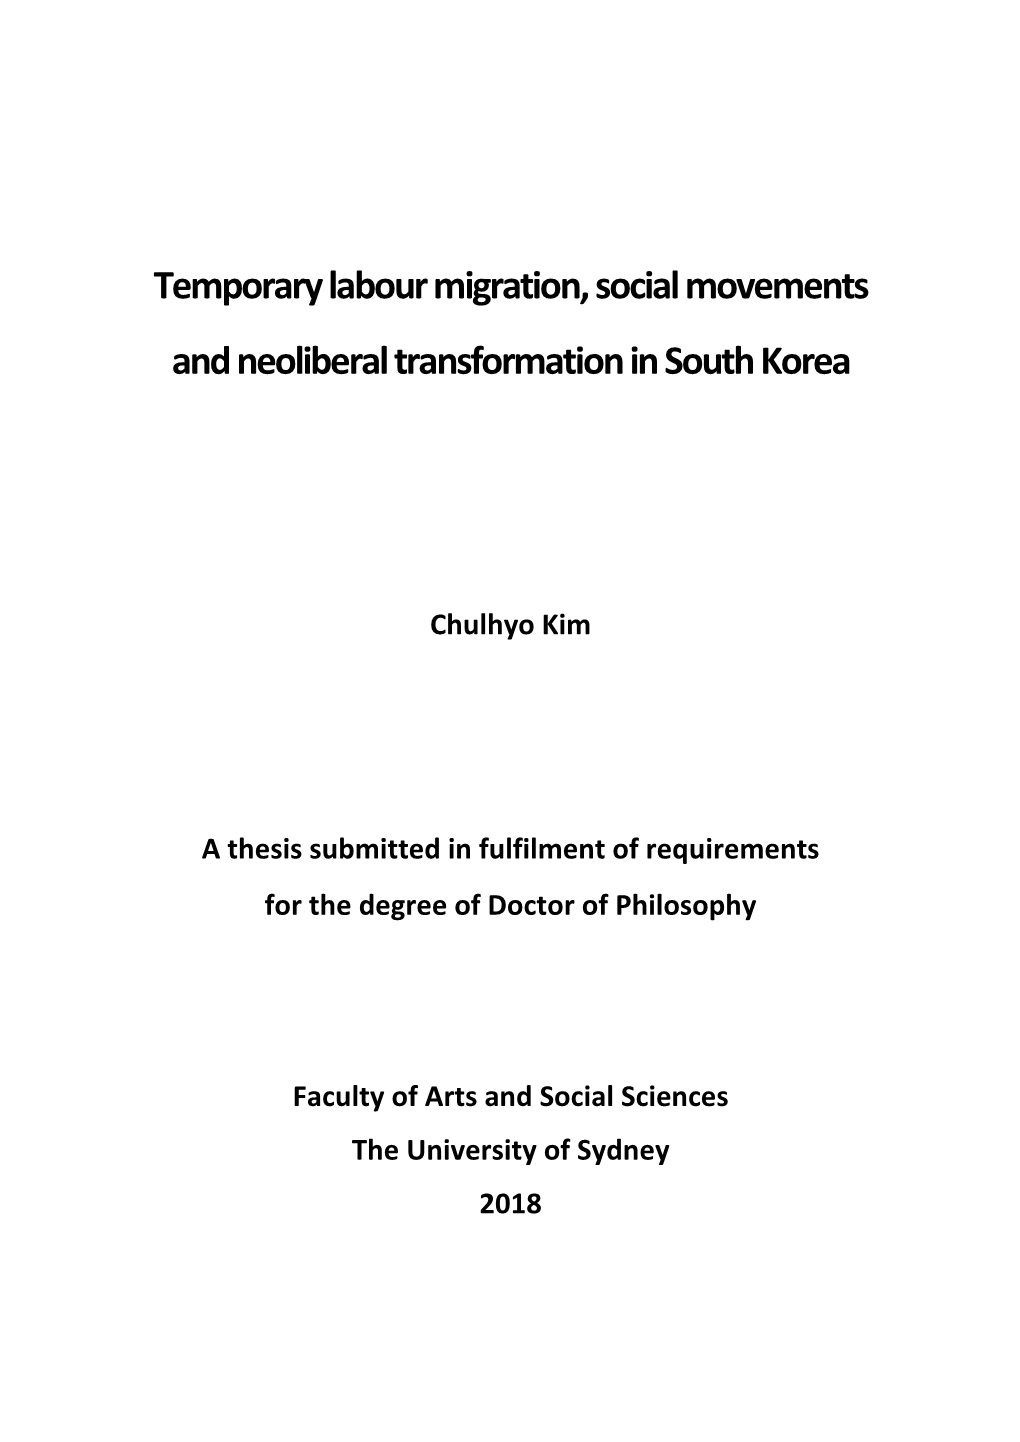 Temporary Labour Migration, Social Movements and Neoliberal Transformation in South Korea